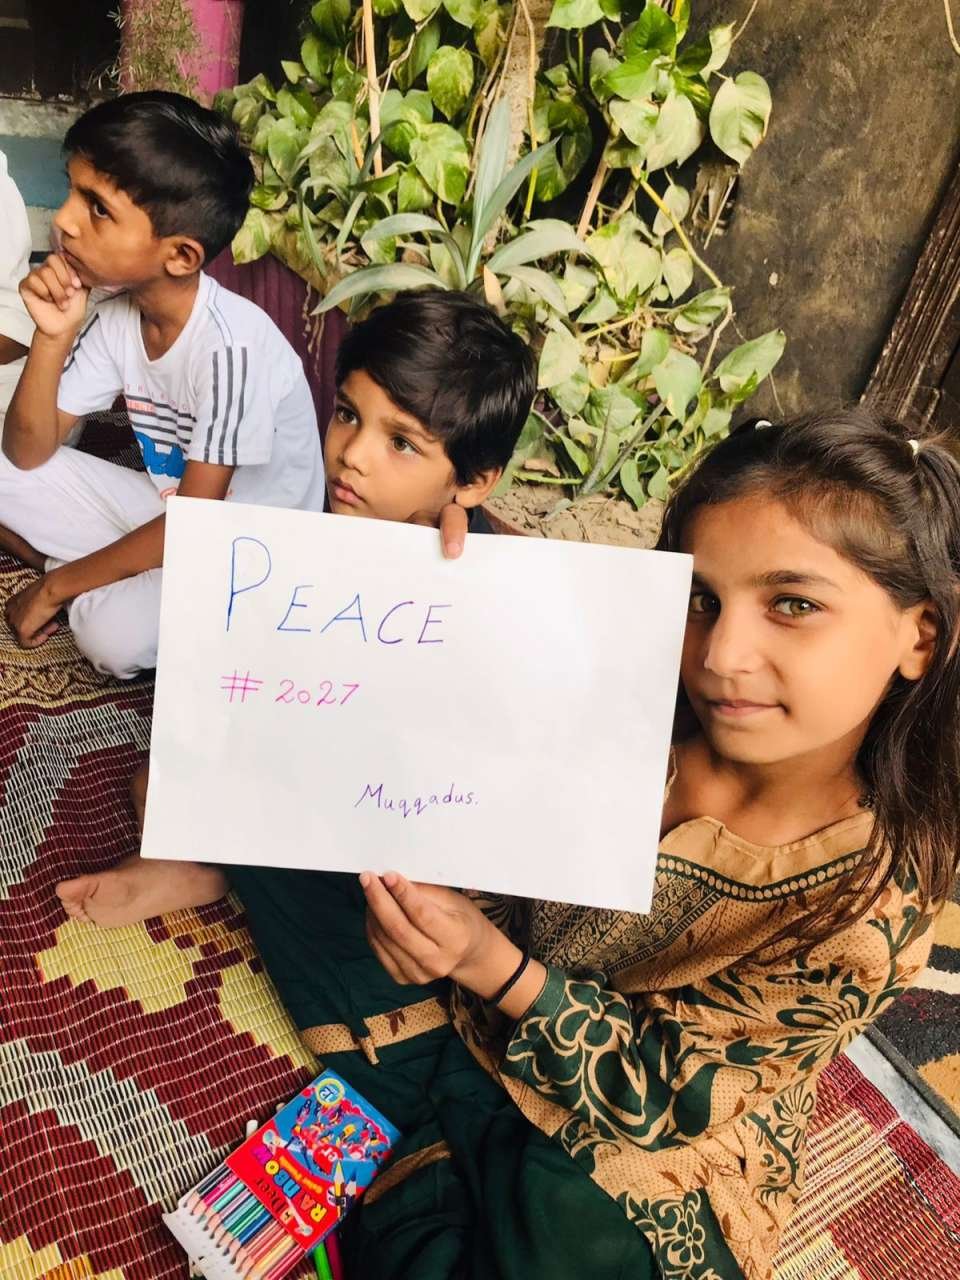 Vote Comment Like Share & sent your pictures for Global #PeacePicture Contest, topic: “ World Children United for #Peace2027” for the Day Against Child Labour 2023 #DaniilFoundation<br />participant from Sargodha in  Pakistan, Miss.Angel Kashif, Phone +92 308 1391498  WhatsApp contact her for Cooperation, To Donate, To Volunteer For Interview <br /><br />& in the memory of Daniil, every year a drawing Contest for #Peace2027 is held, and as Daniil has been drawing #PeacePictures in last days, we invite you to donate to the Daniil Foundation to support him ivacademy.net/en/donate<br />Important Please SHARE this information wide to enable all 8B+ people to participate and Complete Ultimate Global Peace Building by 2027